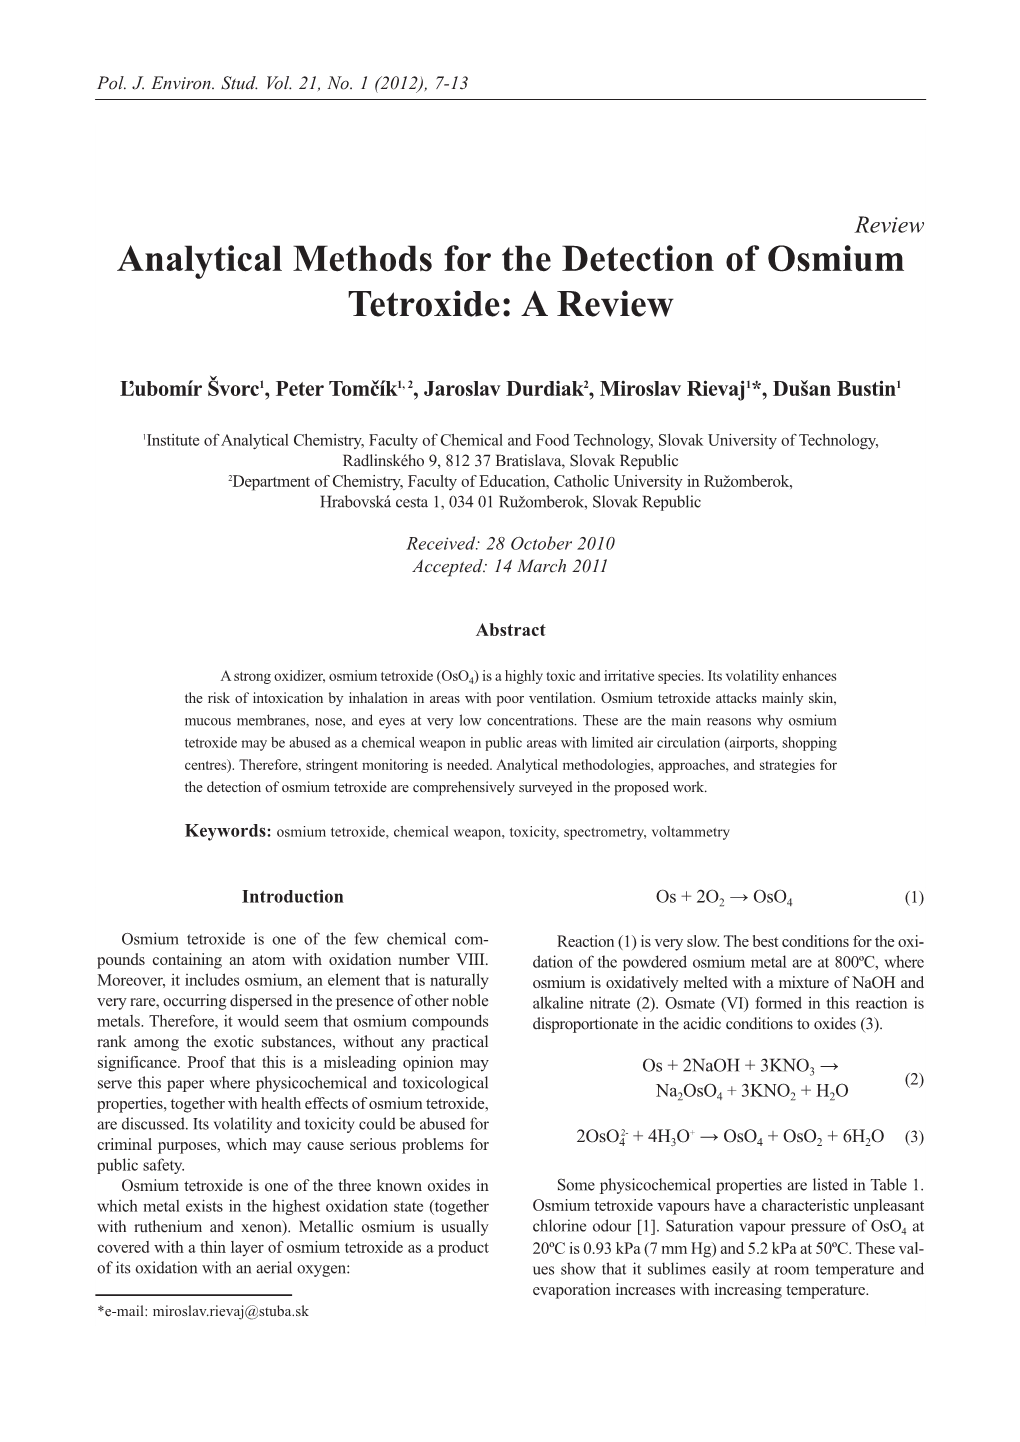 Analytical Methods for the Detection of Osmium Tetroxide: a Review